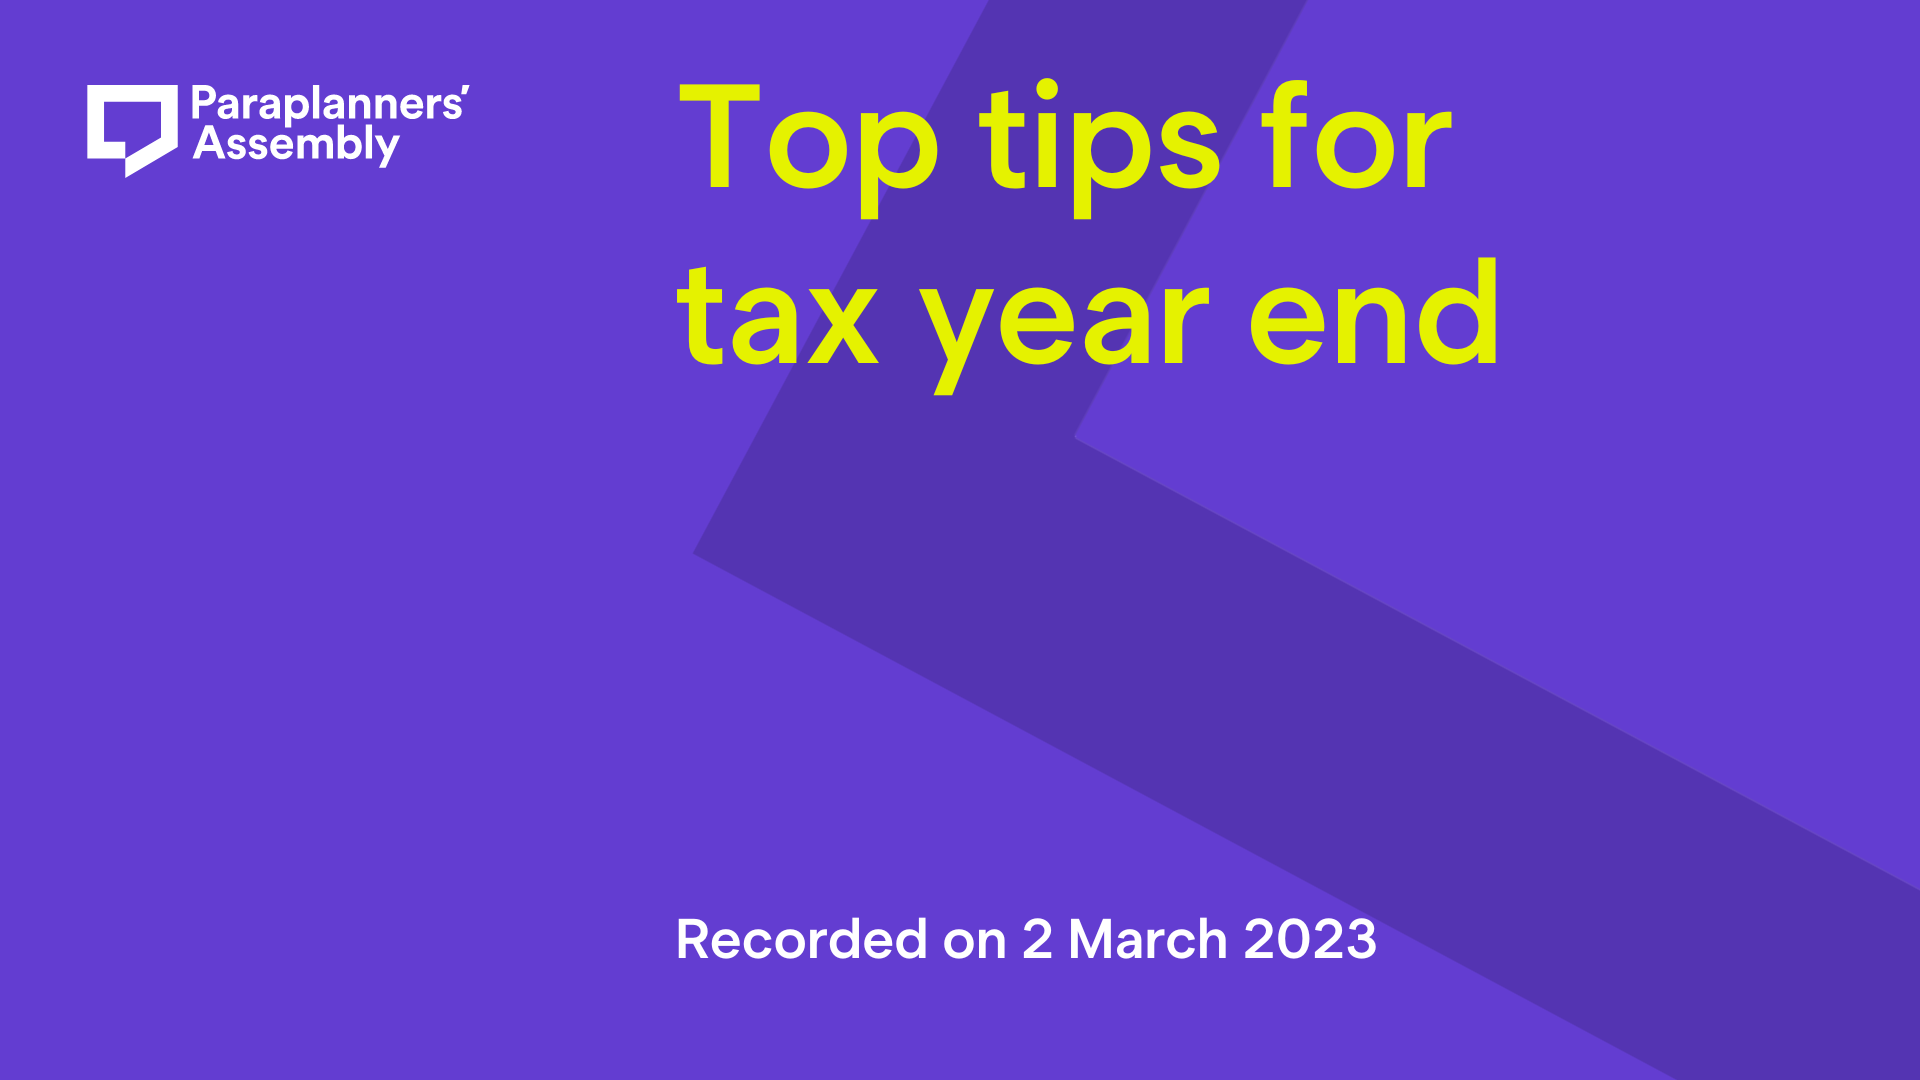 Top tips for tax year end